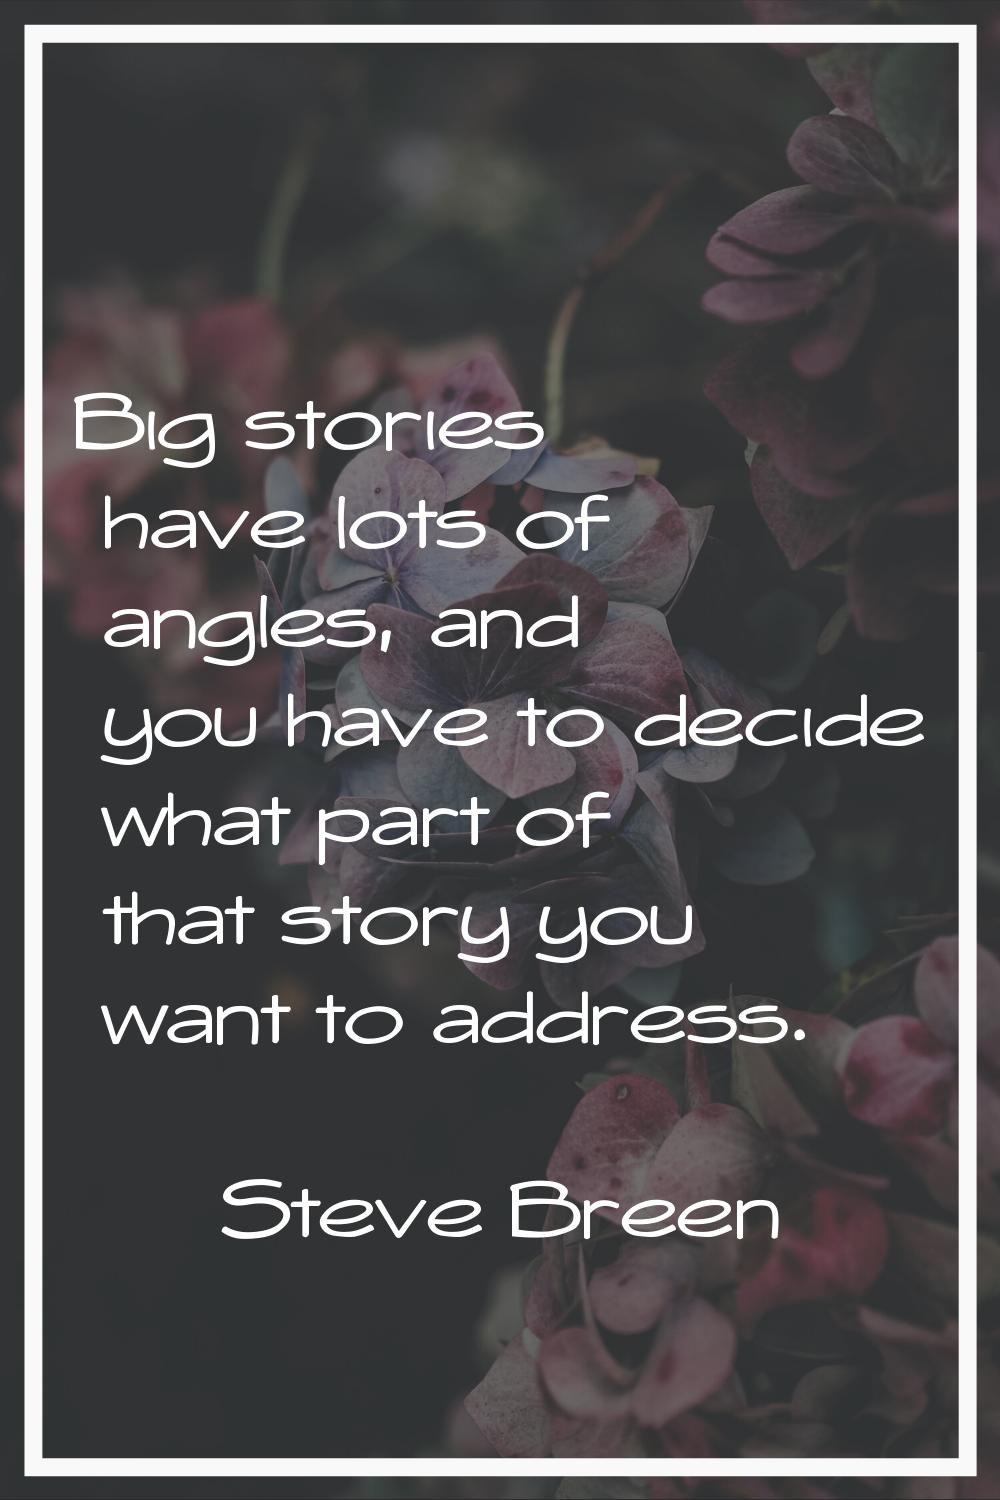 Big stories have lots of angles, and you have to decide what part of that story you want to address